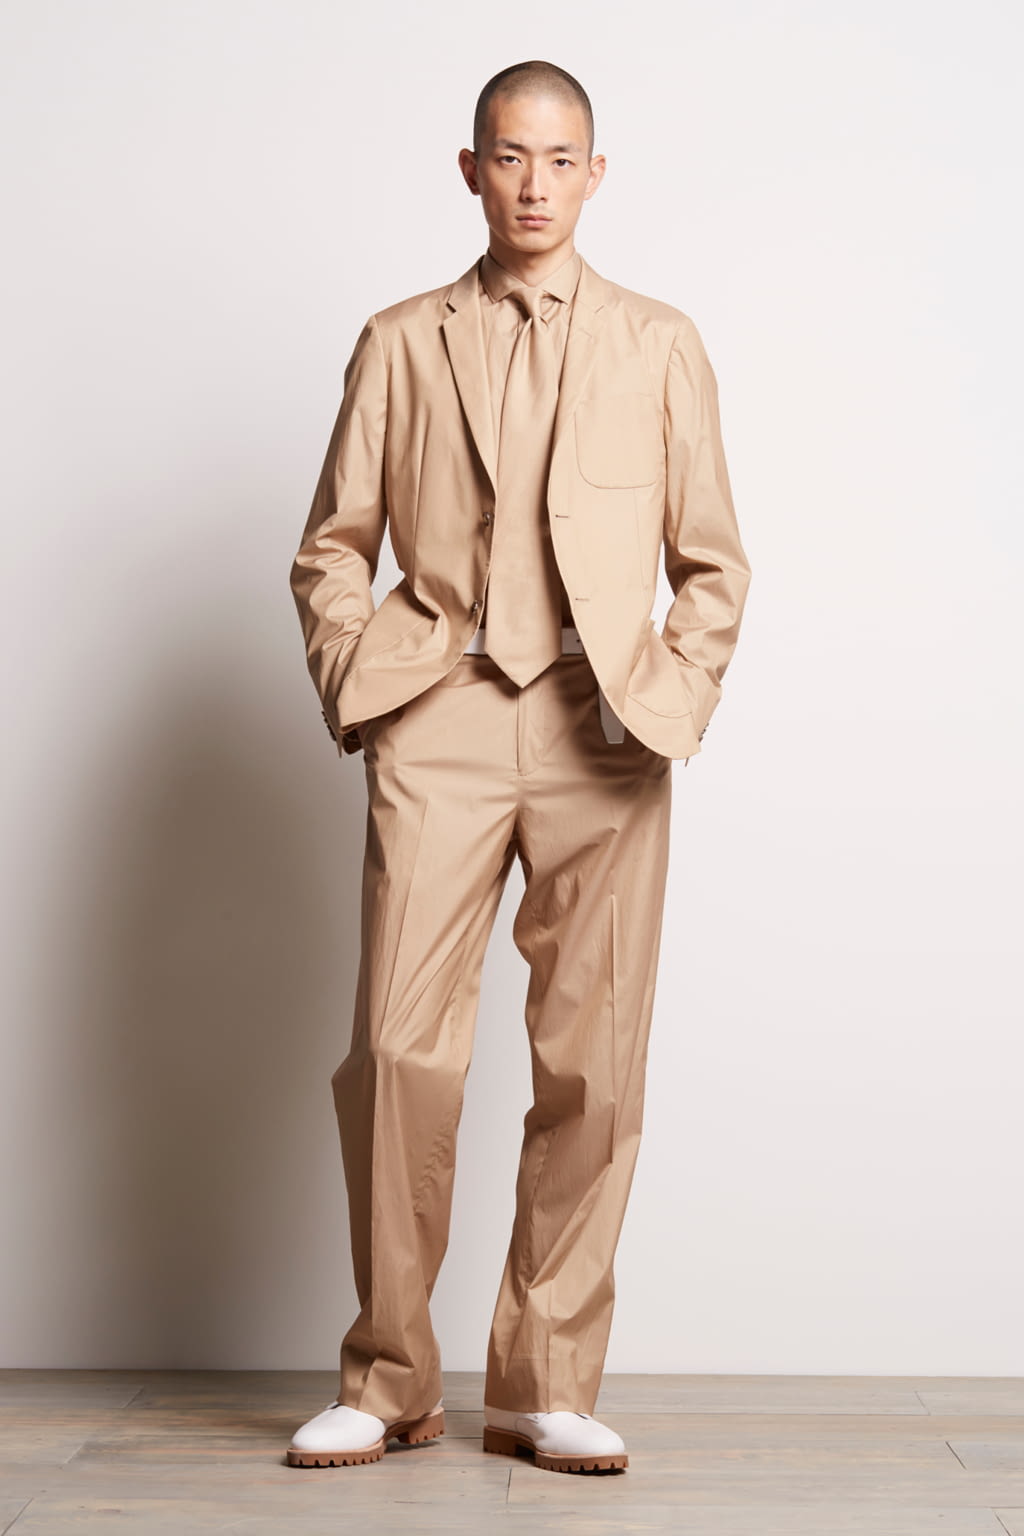 Michael Kors Collection S/S 17 menswear - The Fashion Search Engine - TAGWALK